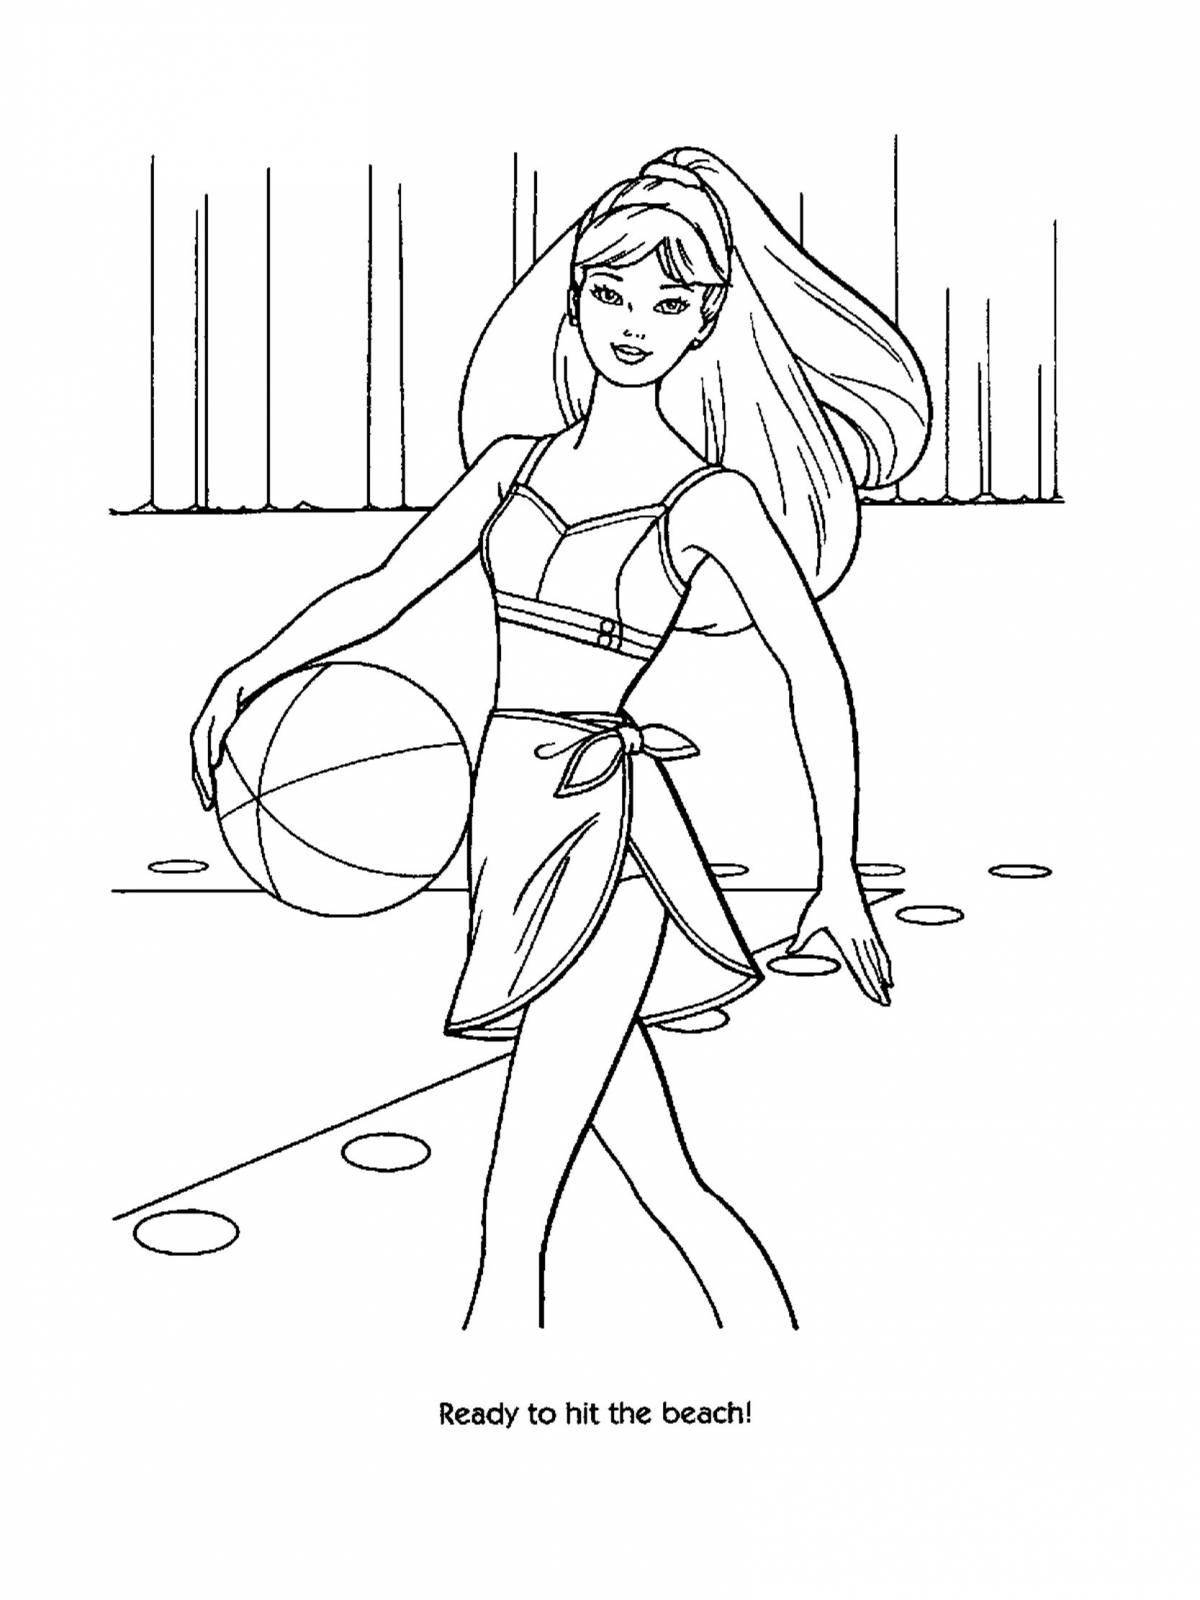 Bright barbie coloring page on the beach